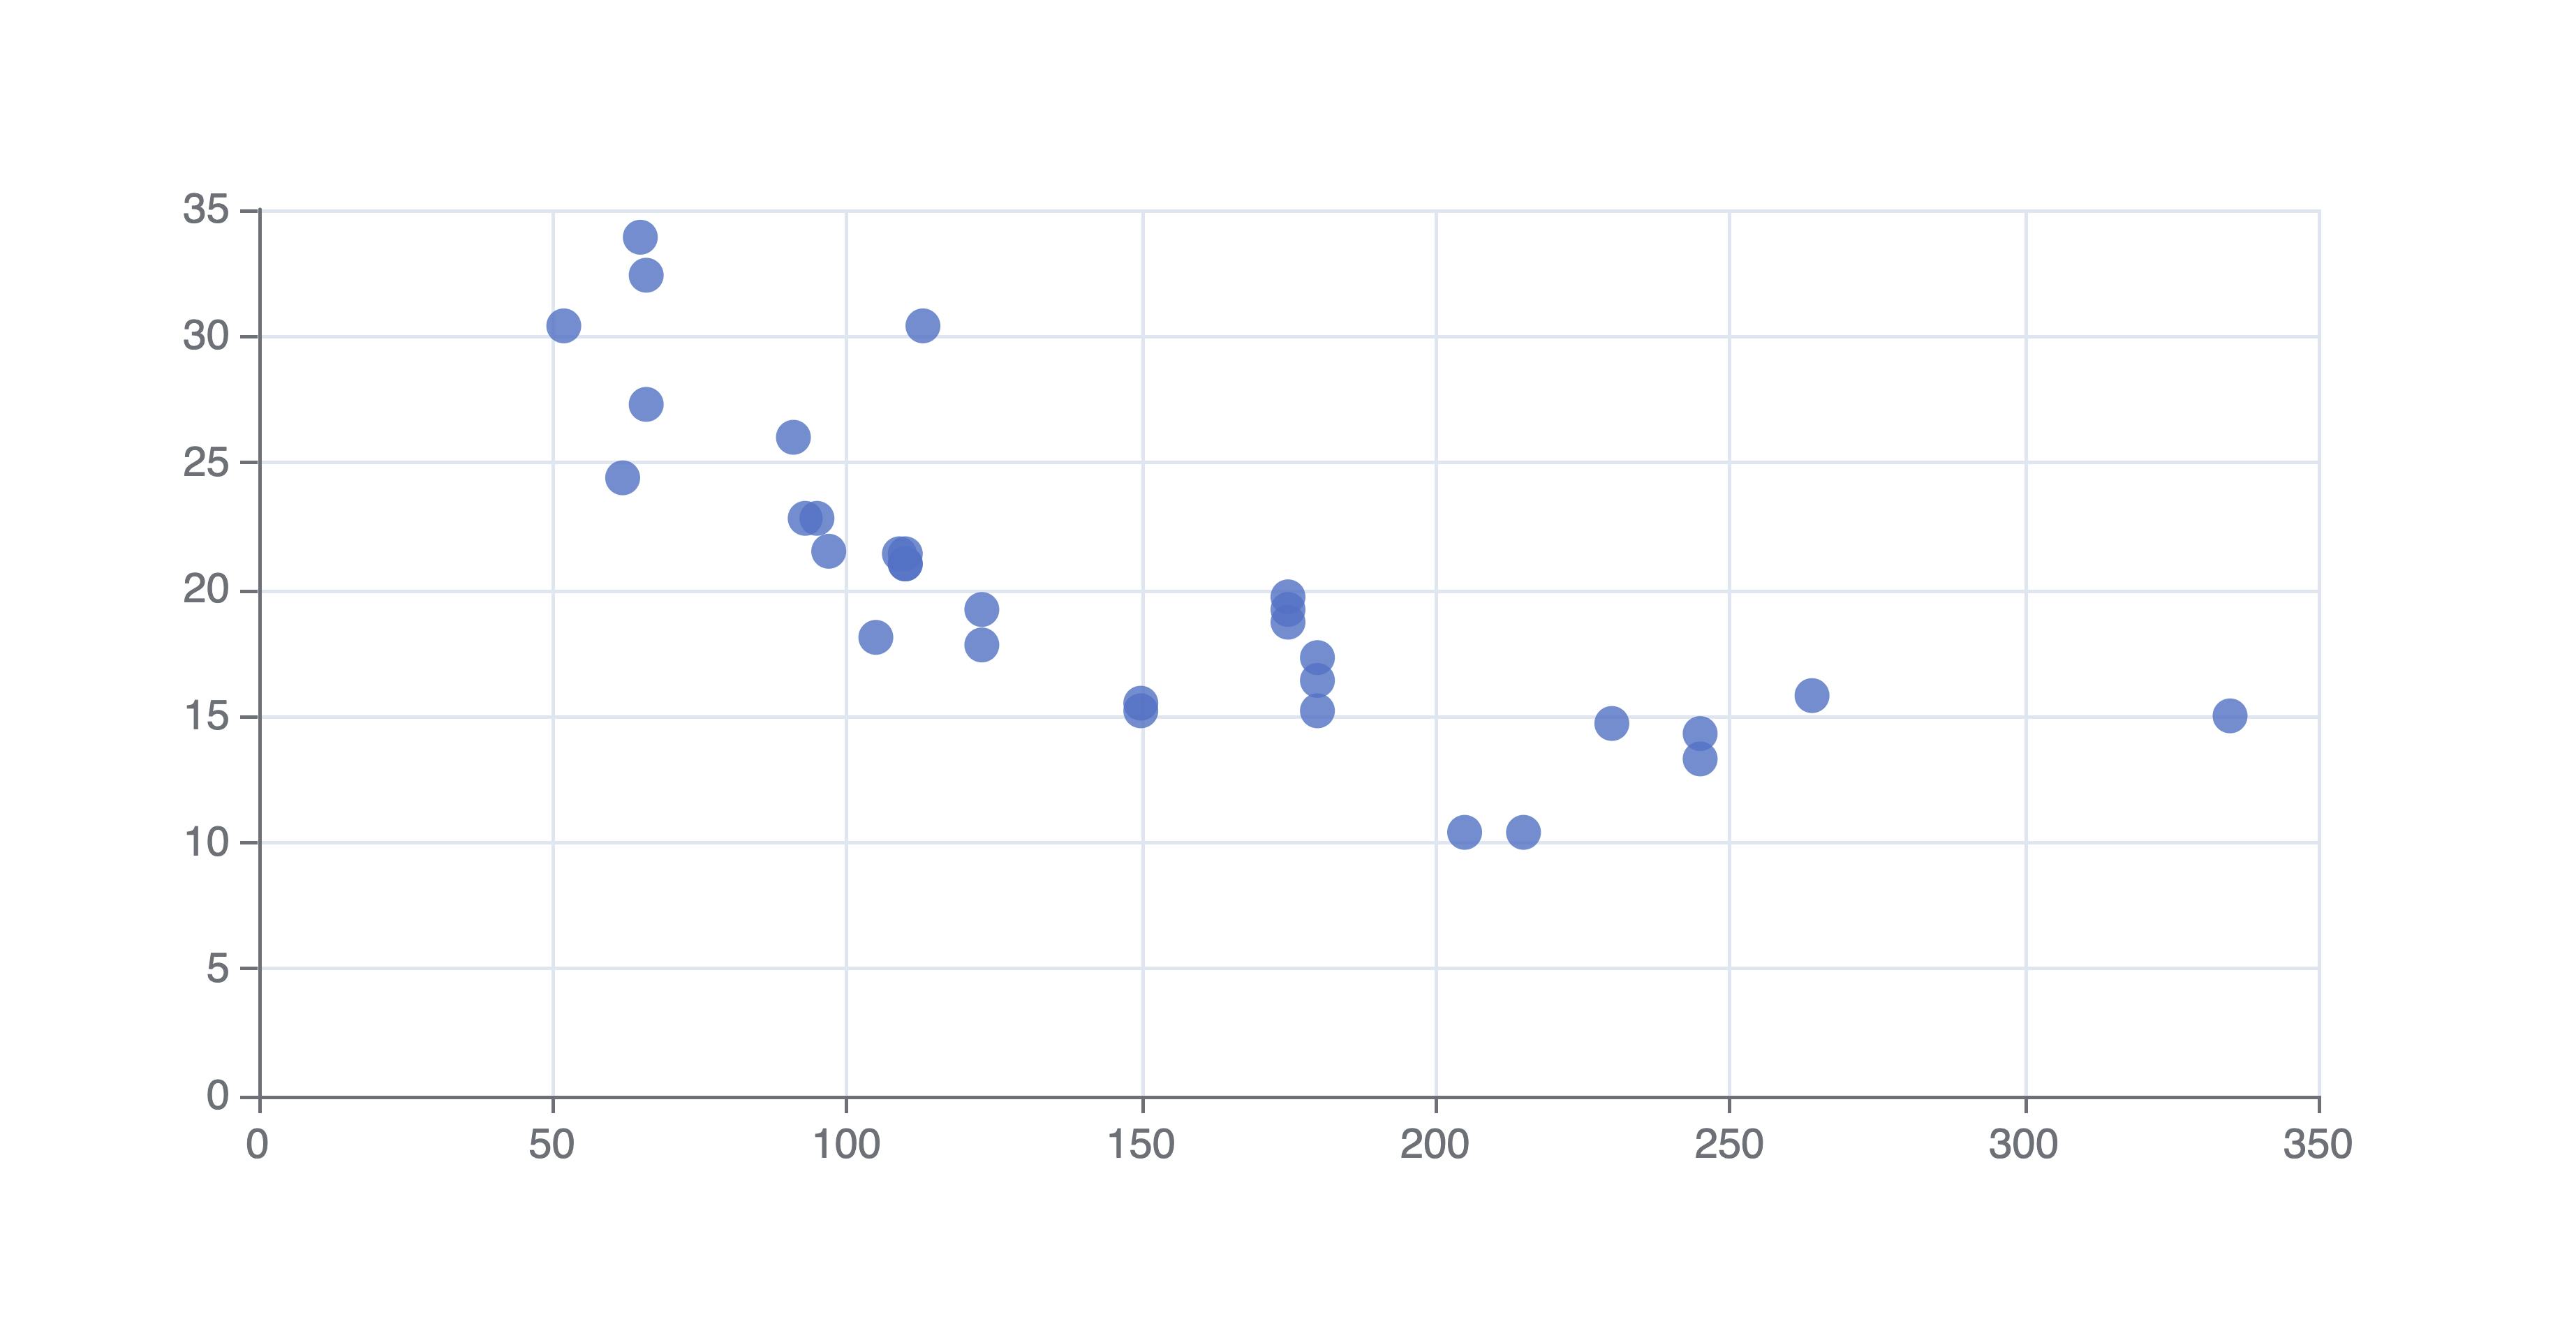 Scatter plot showing relationship between horsepower and miles per gallon for cars in the mtcars data set